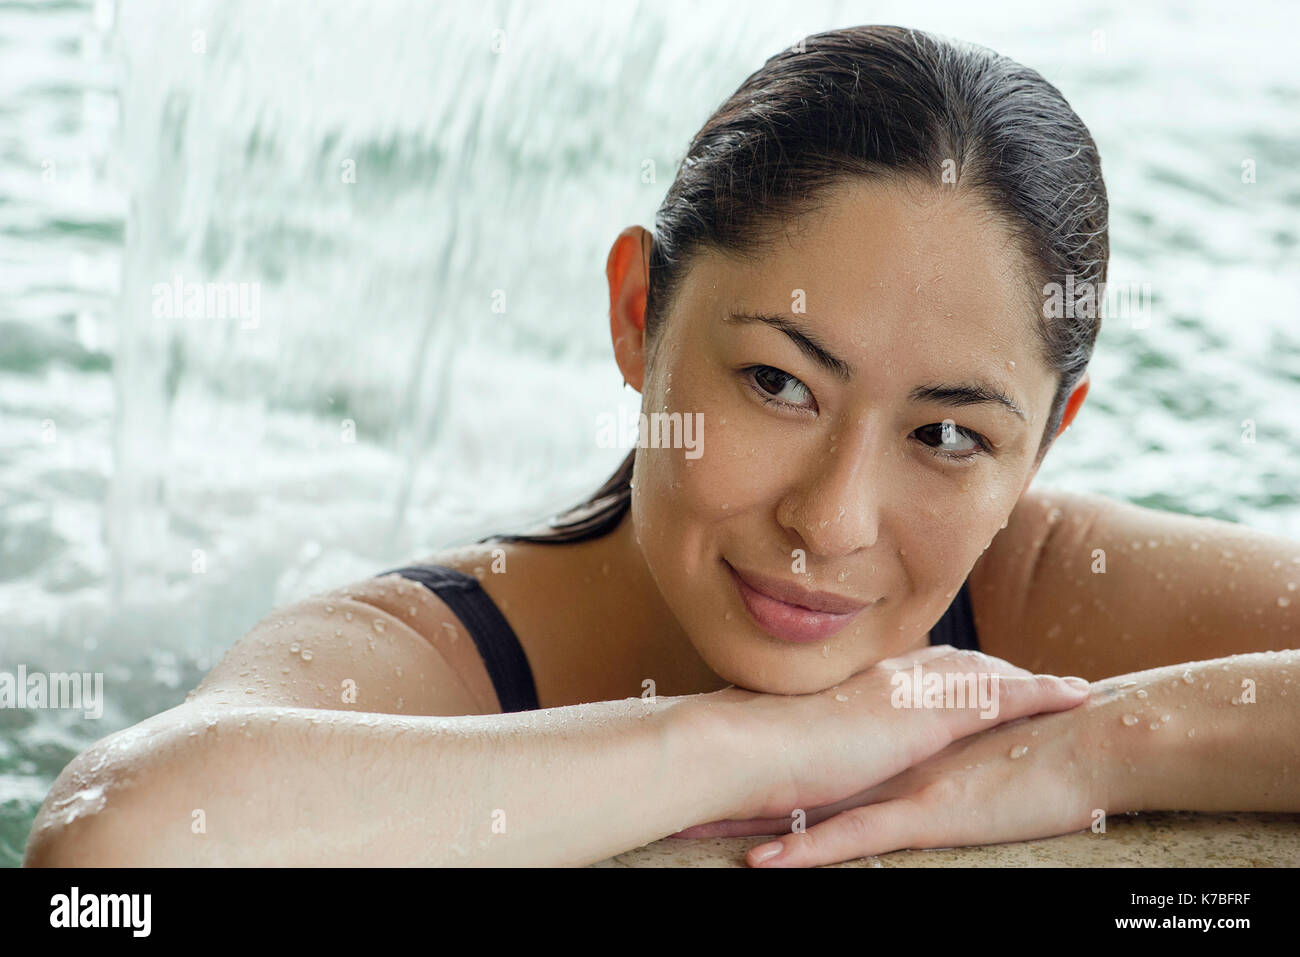 Woman relaxing in pool Banque D'Images